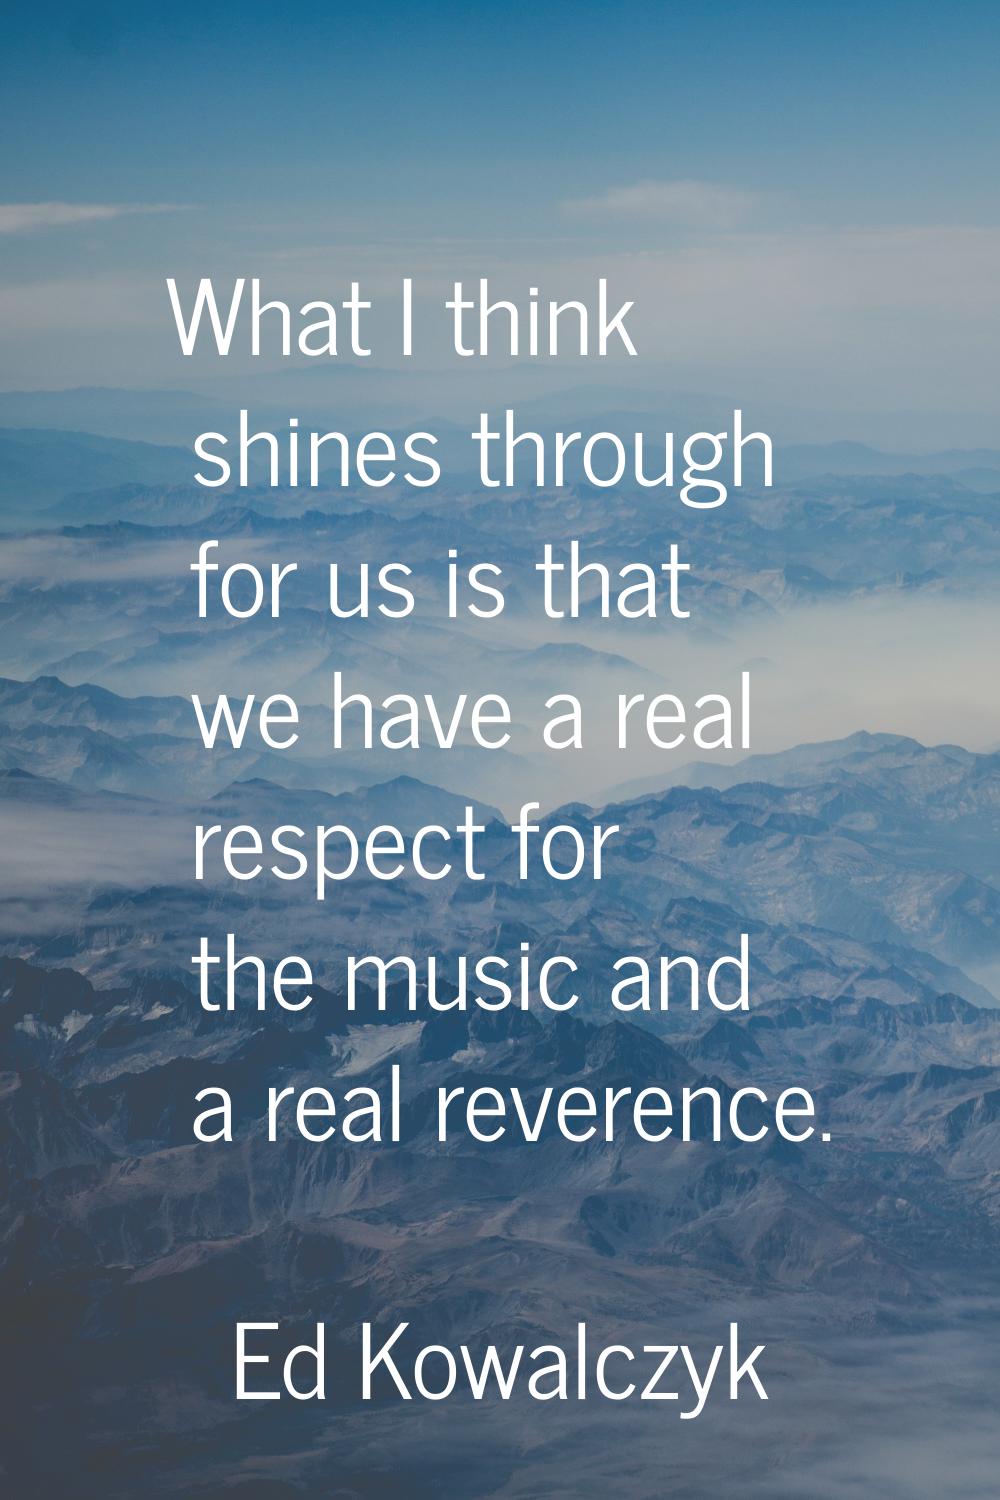 What I think shines through for us is that we have a real respect for the music and a real reverenc